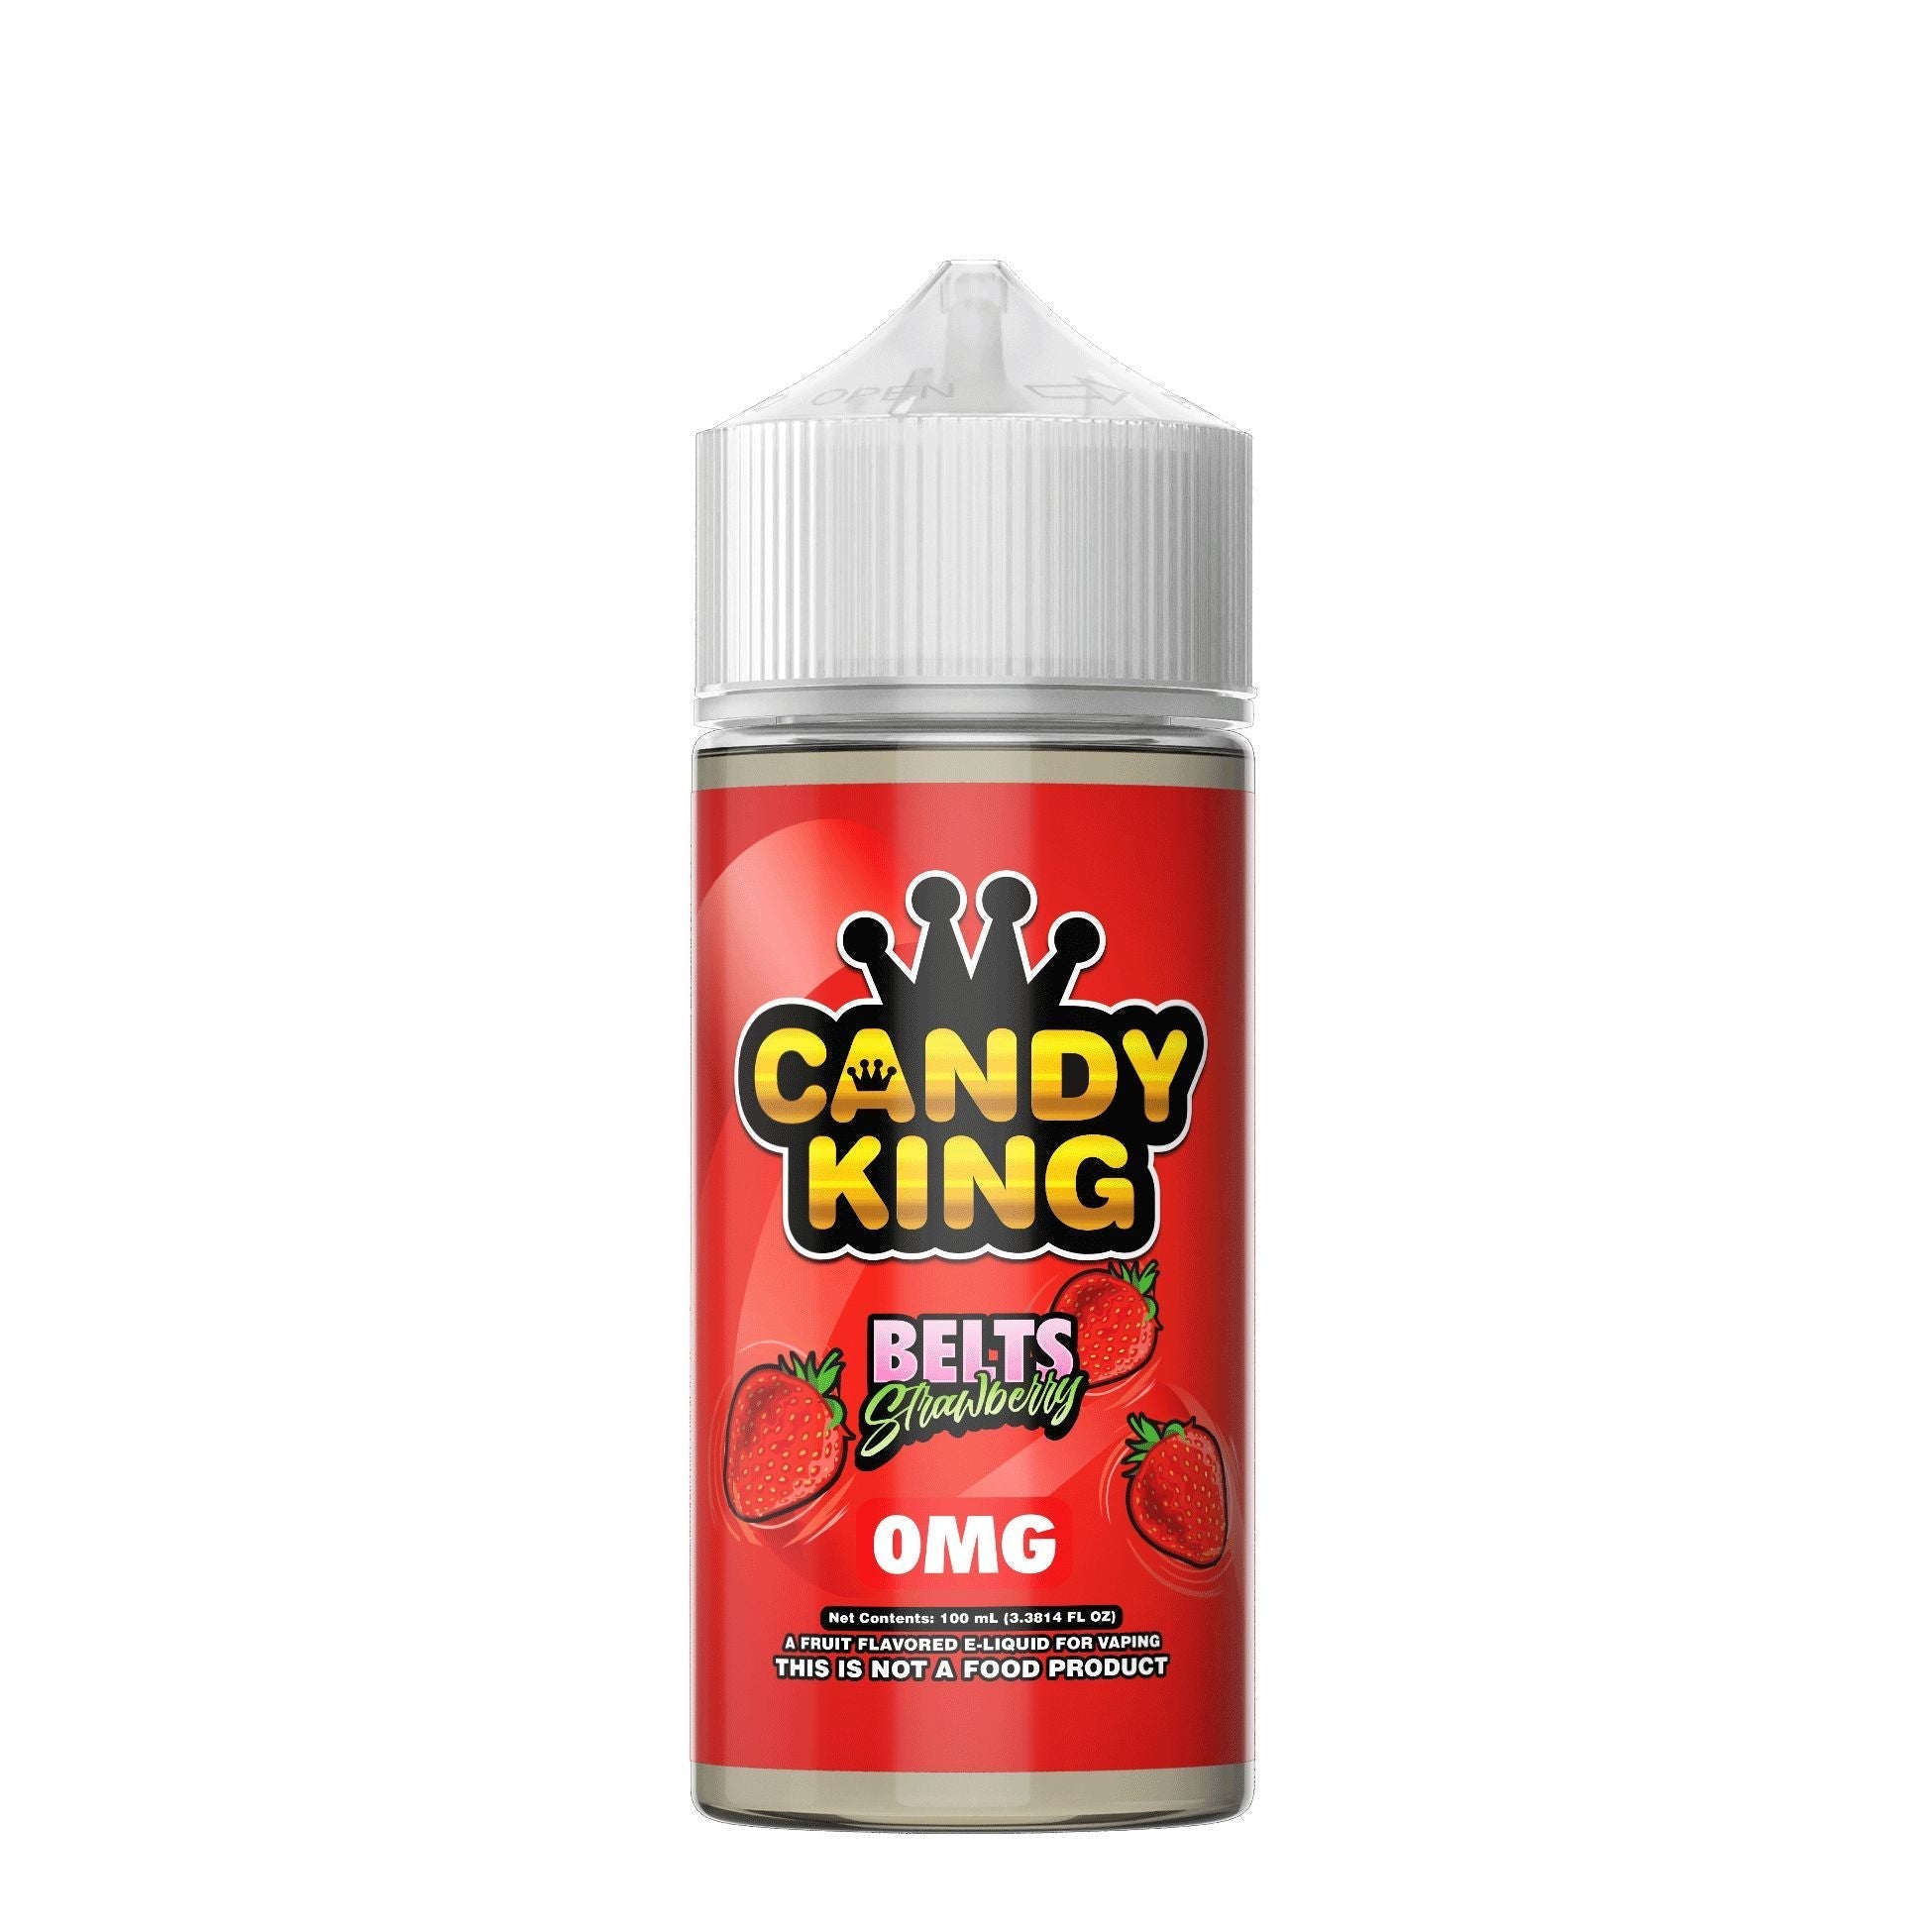 Buy Candy King | 100ml | Belts Strawberry | Wholesale - Wick And Wire Co Melbourne Vape Shop, Victoria Australia